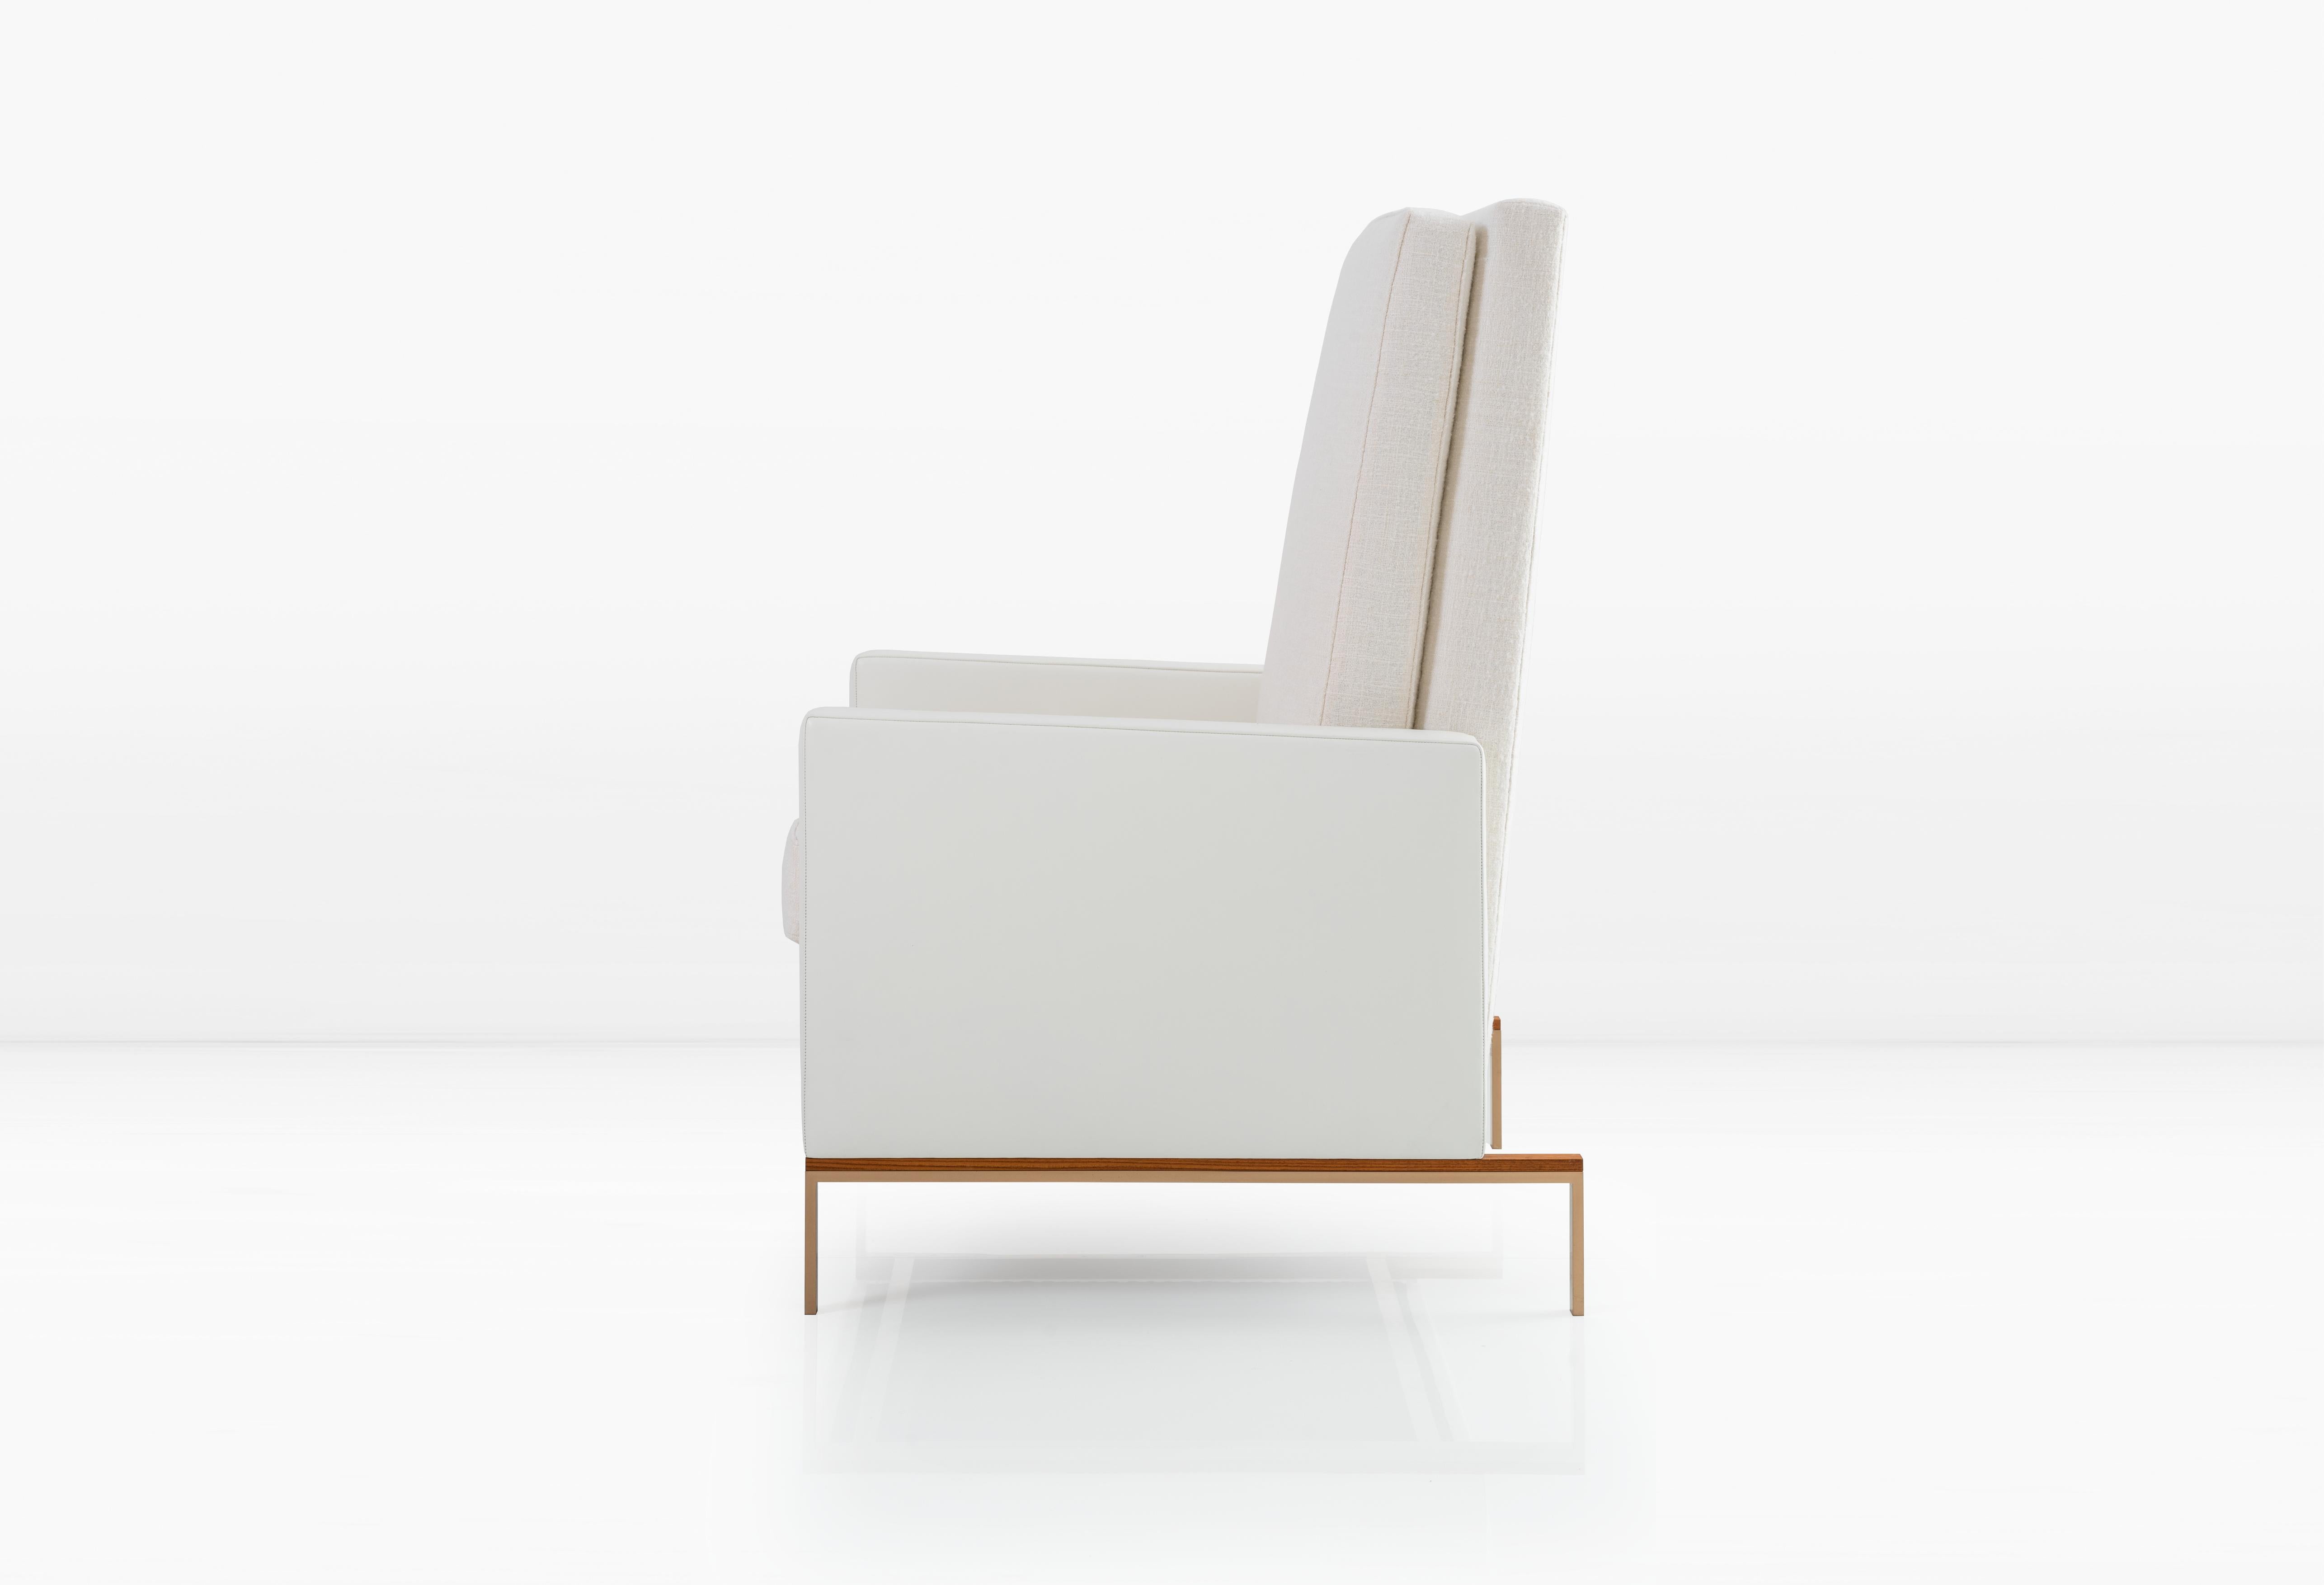 Merging architectural design with comfort, the Larkin Chair is made of white boucle and leather materials and a Silicon Bronze wooden base. 

W 27” x D 35” x H 47 ½”
Arm Height 24